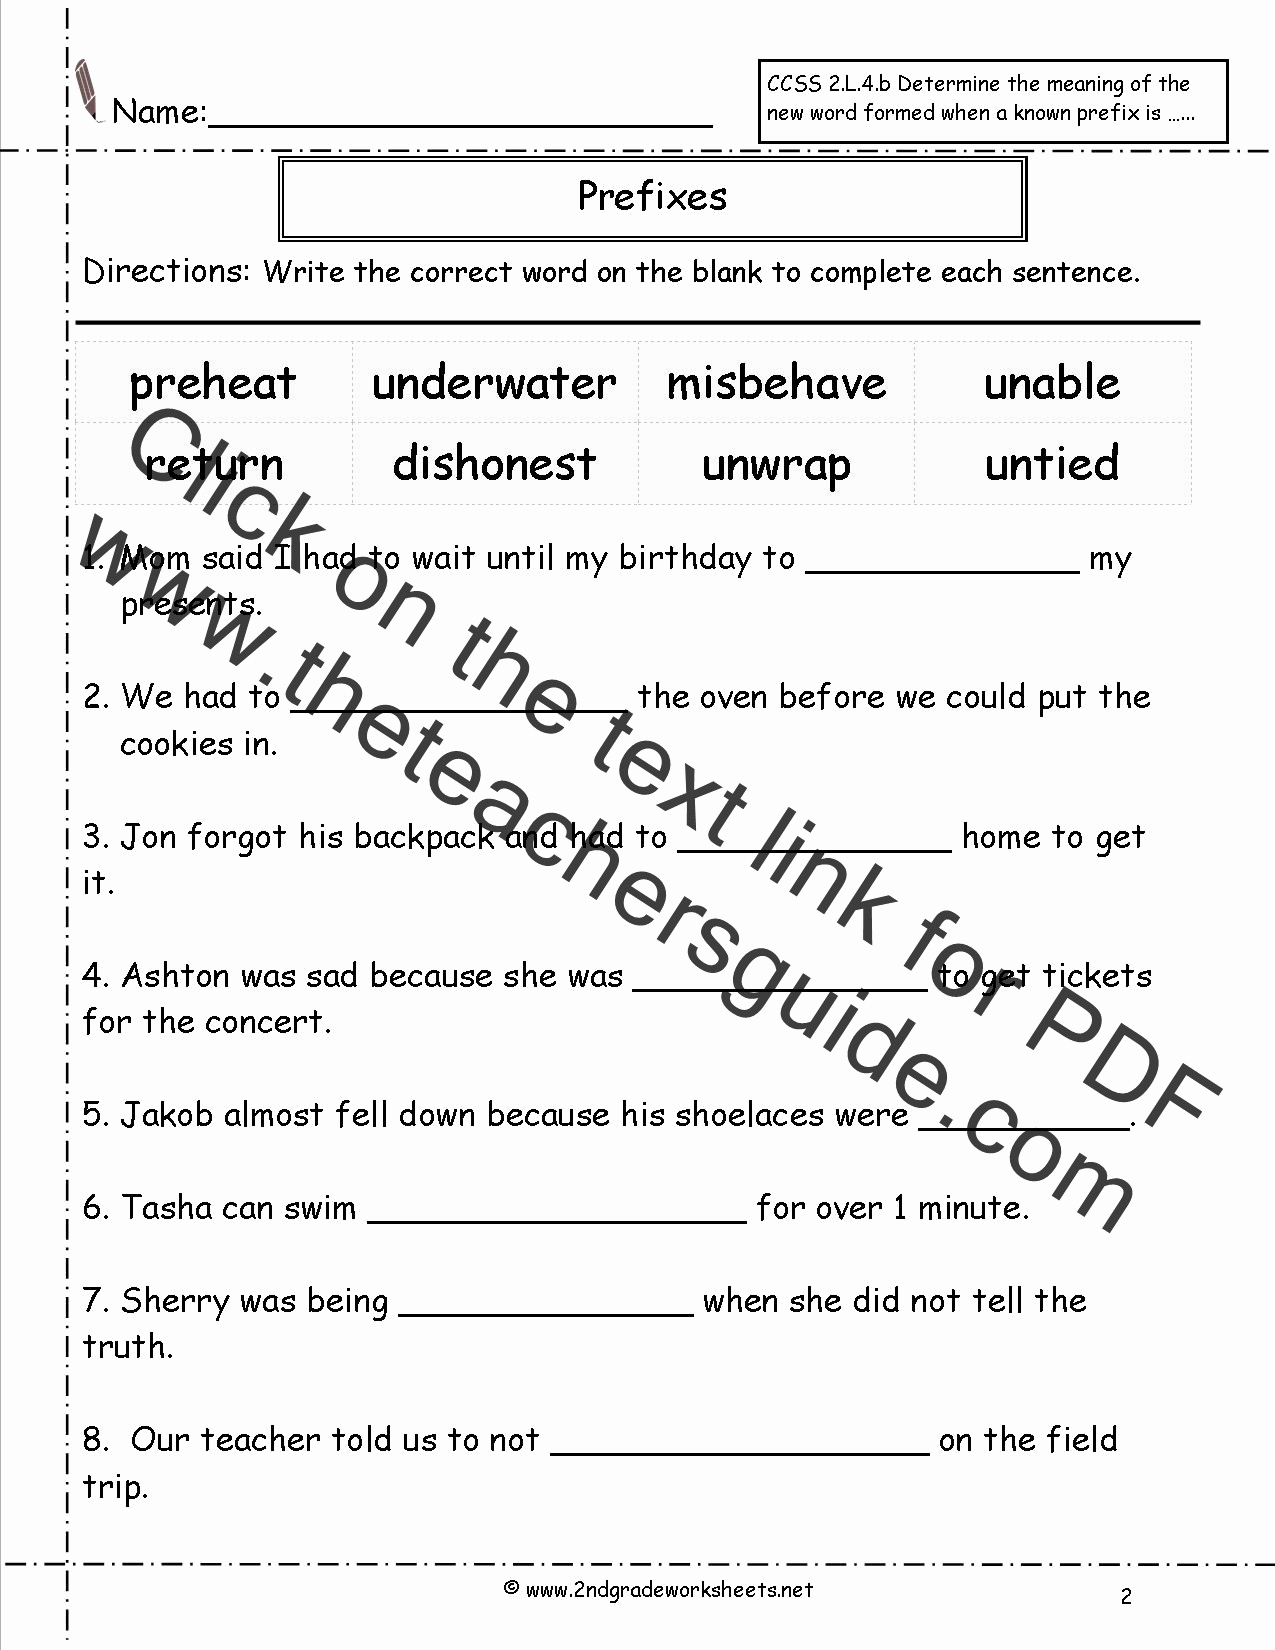 Root Word Worksheets 4th Grade Luxury 20 Suffix Worksheets for 4th Grade